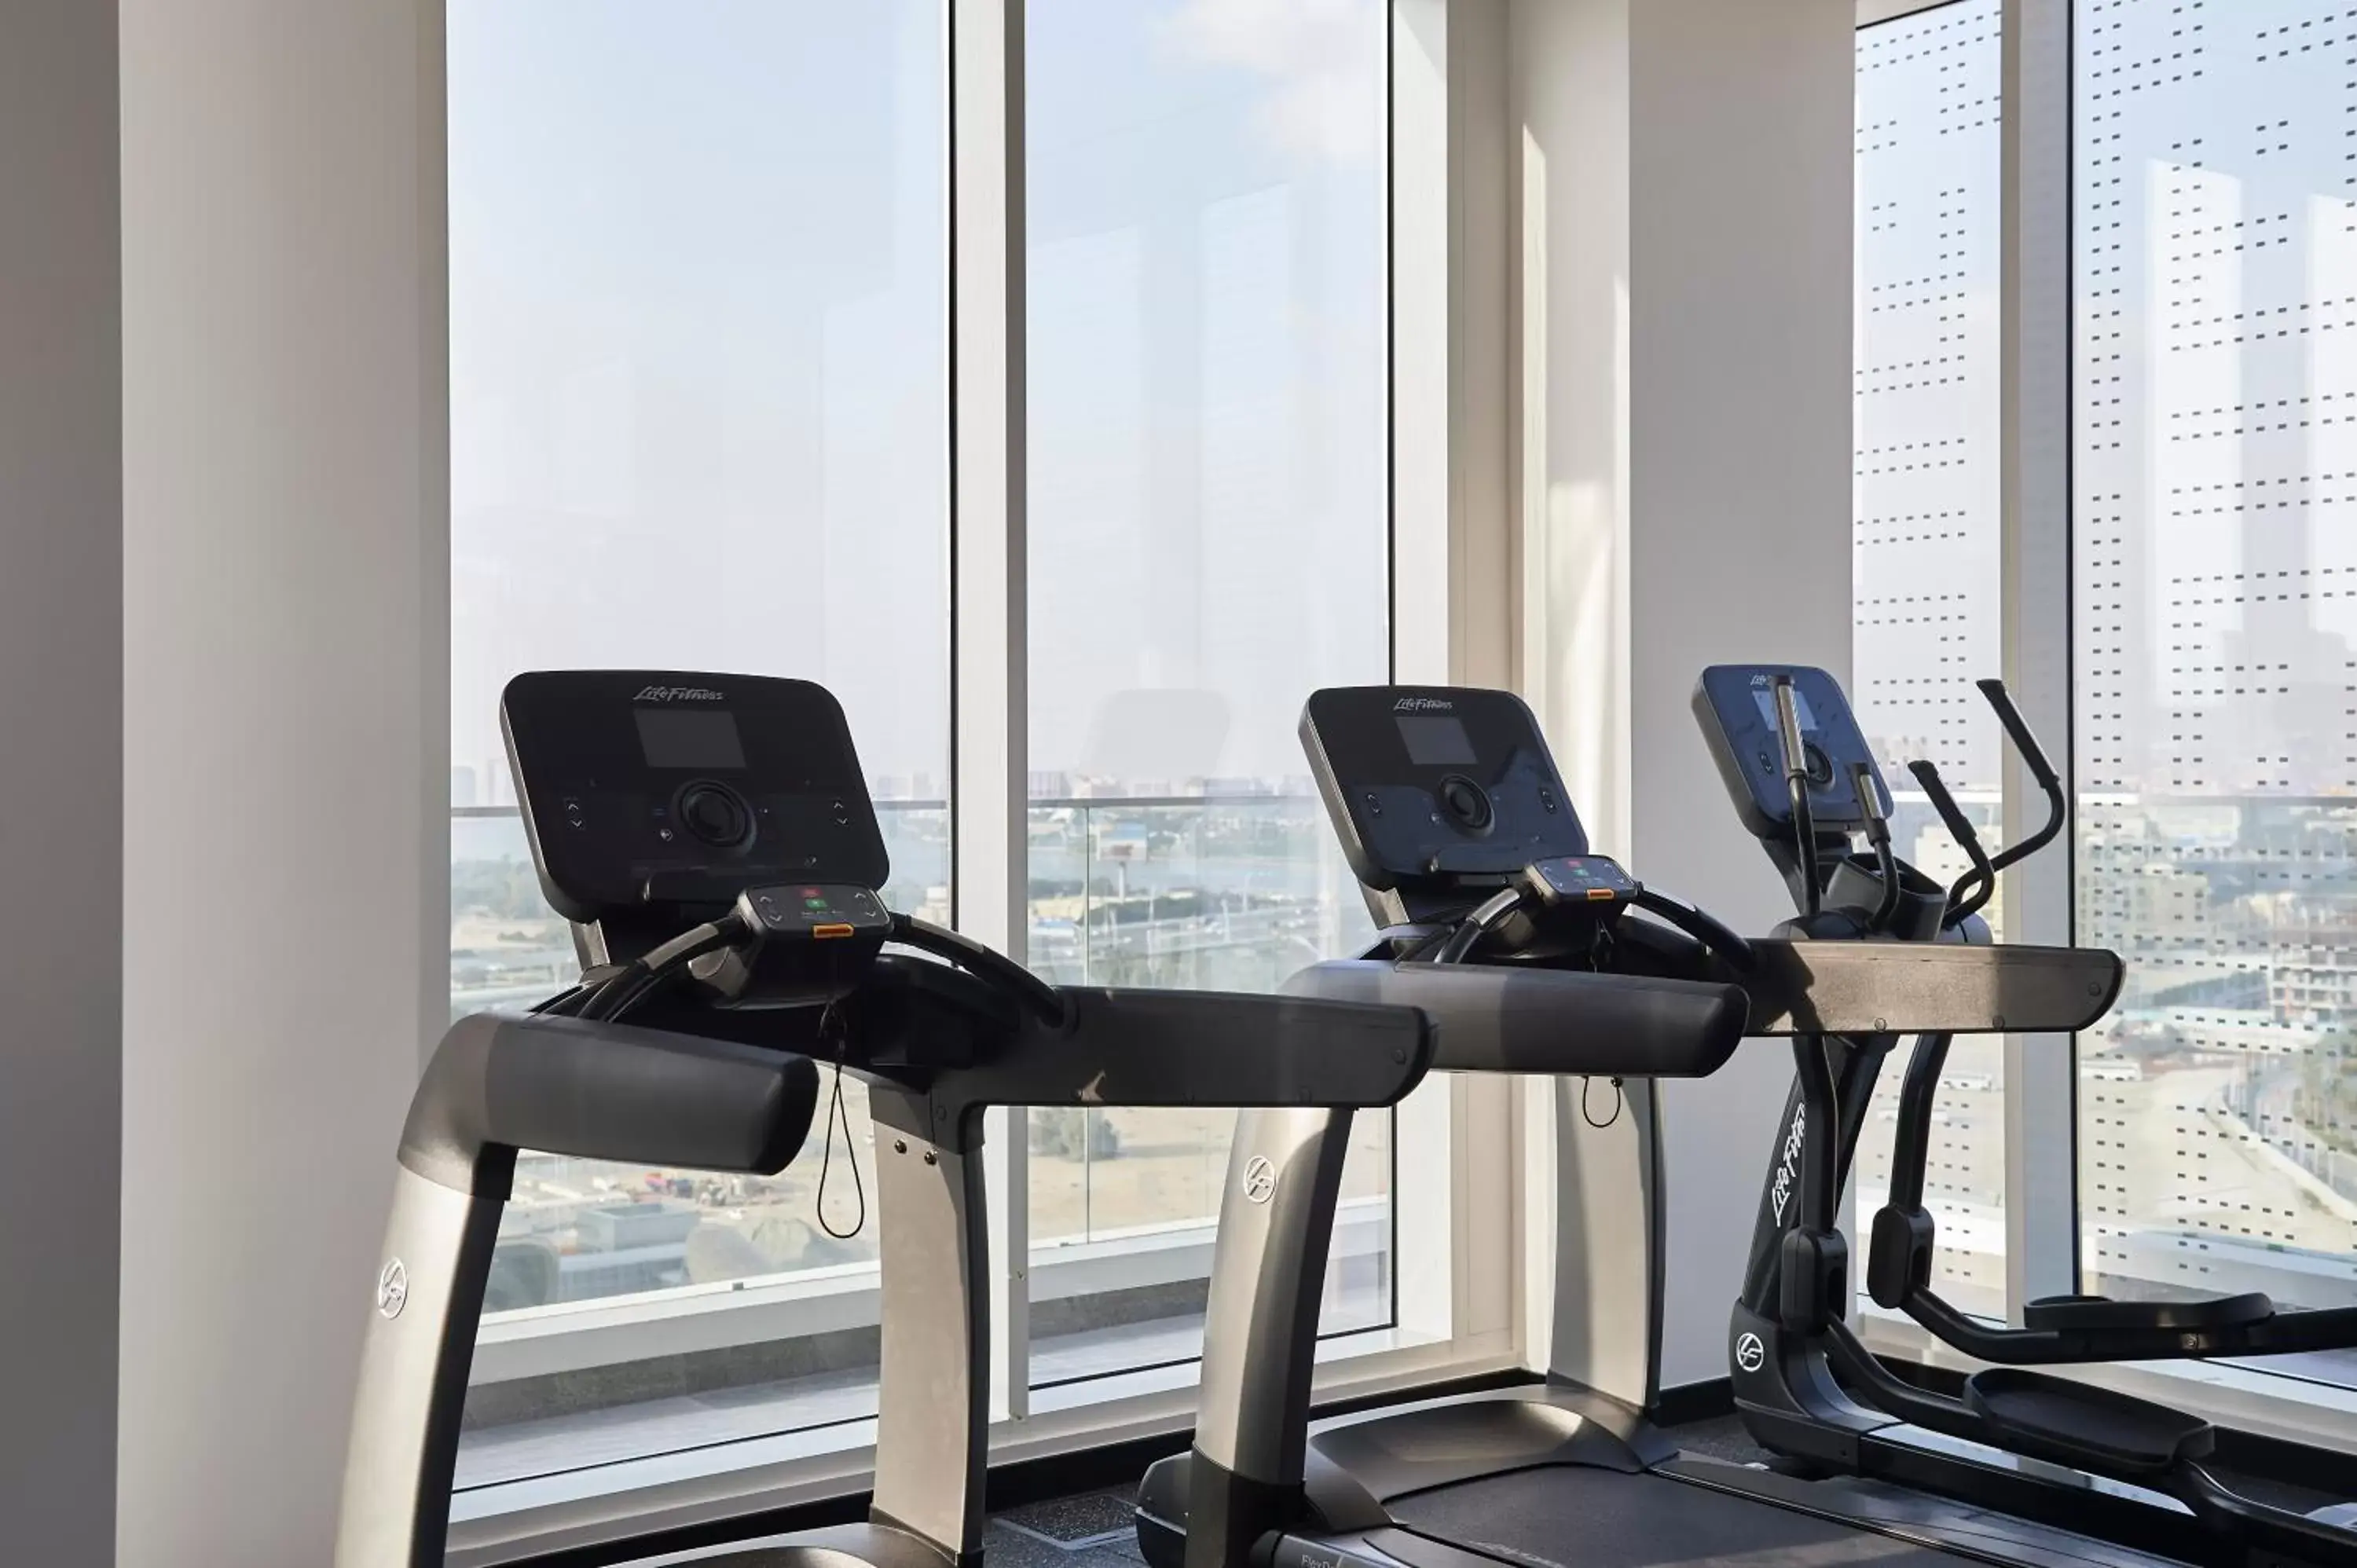 Fitness centre/facilities, Fitness Center/Facilities in FORM Hotel Dubai, a Member of Design Hotels